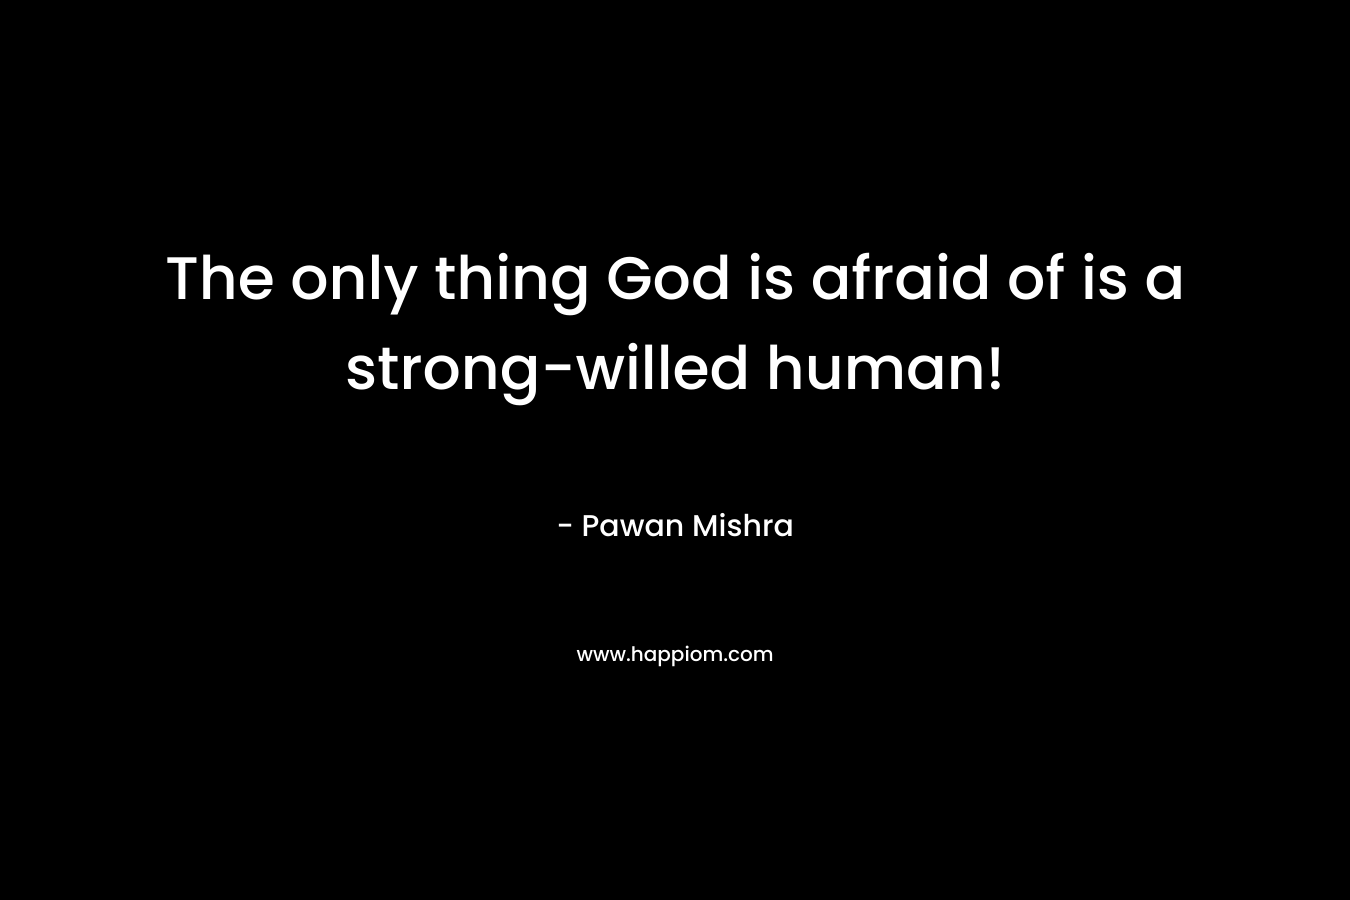 The only thing God is afraid of is a strong-willed human! – Pawan Mishra